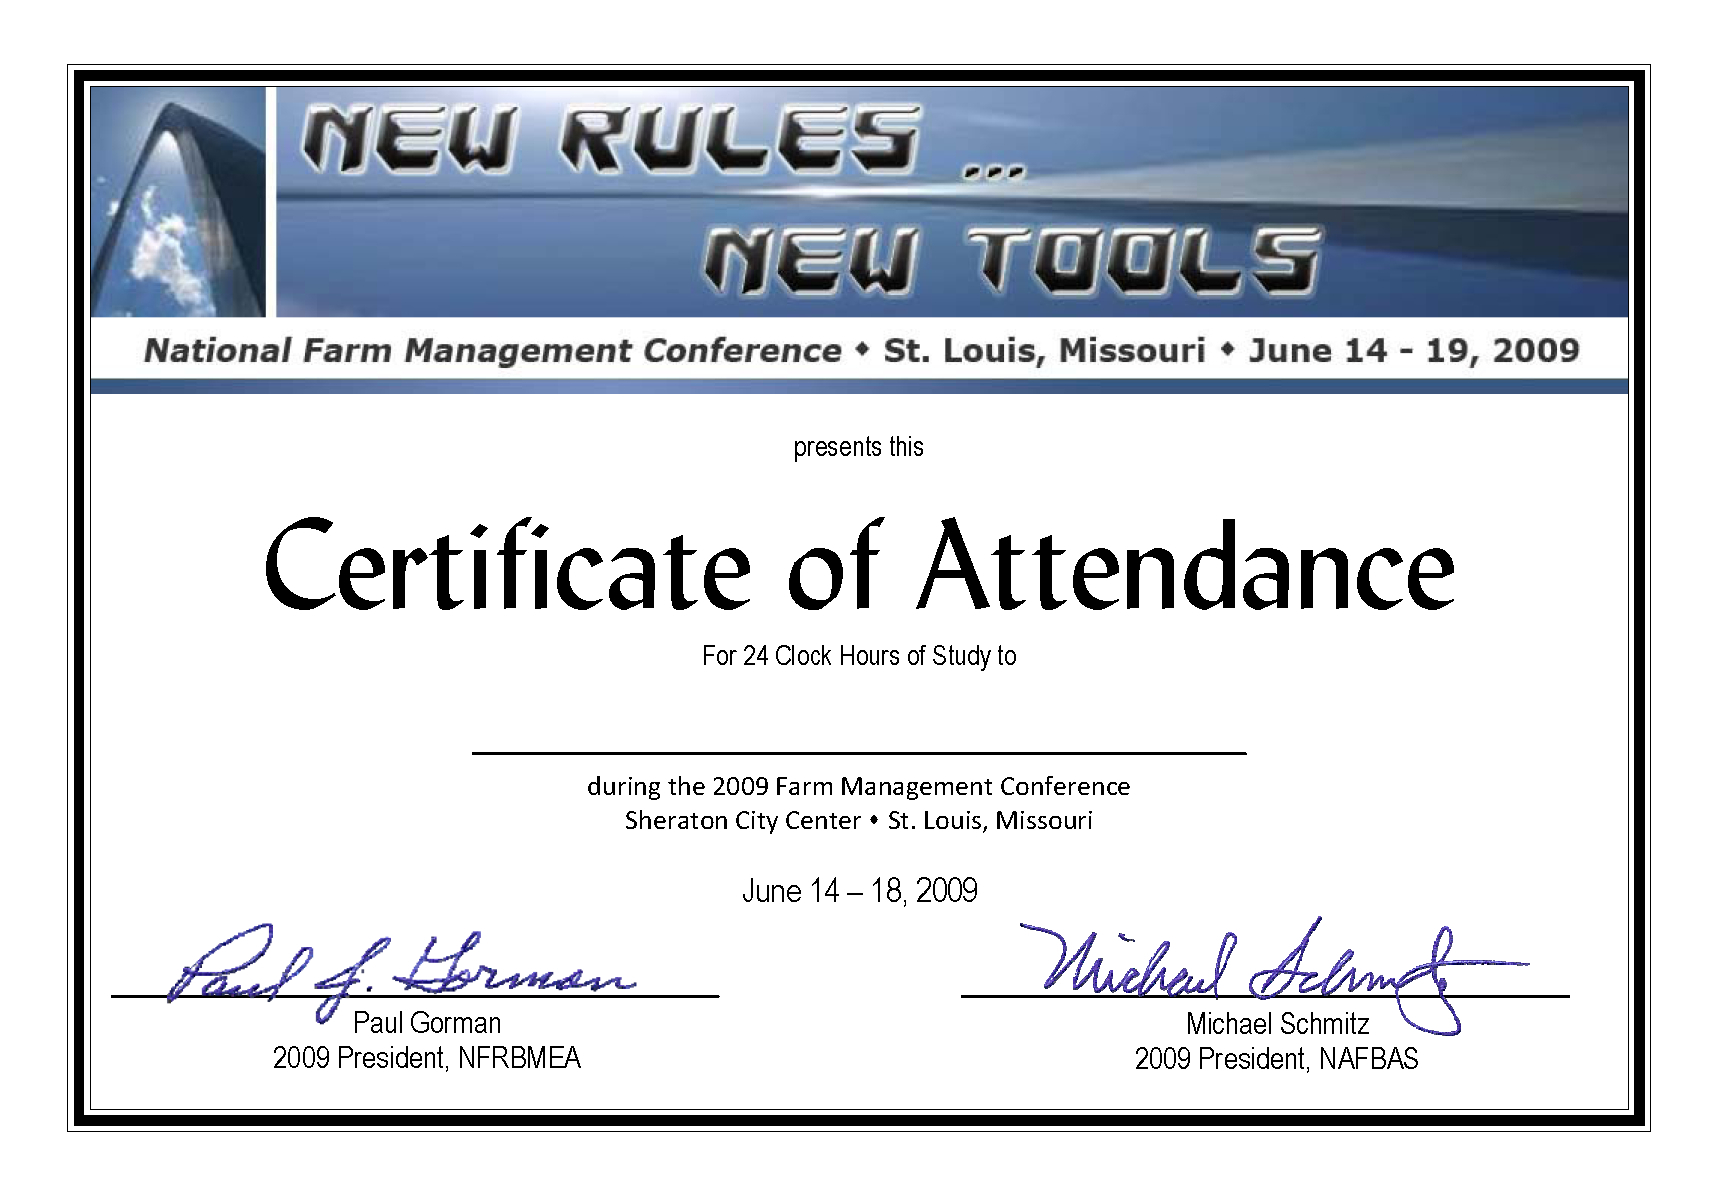 Conference Certificate Of Attendance Template - Great Inside Certificate Of Attendance Conference Template